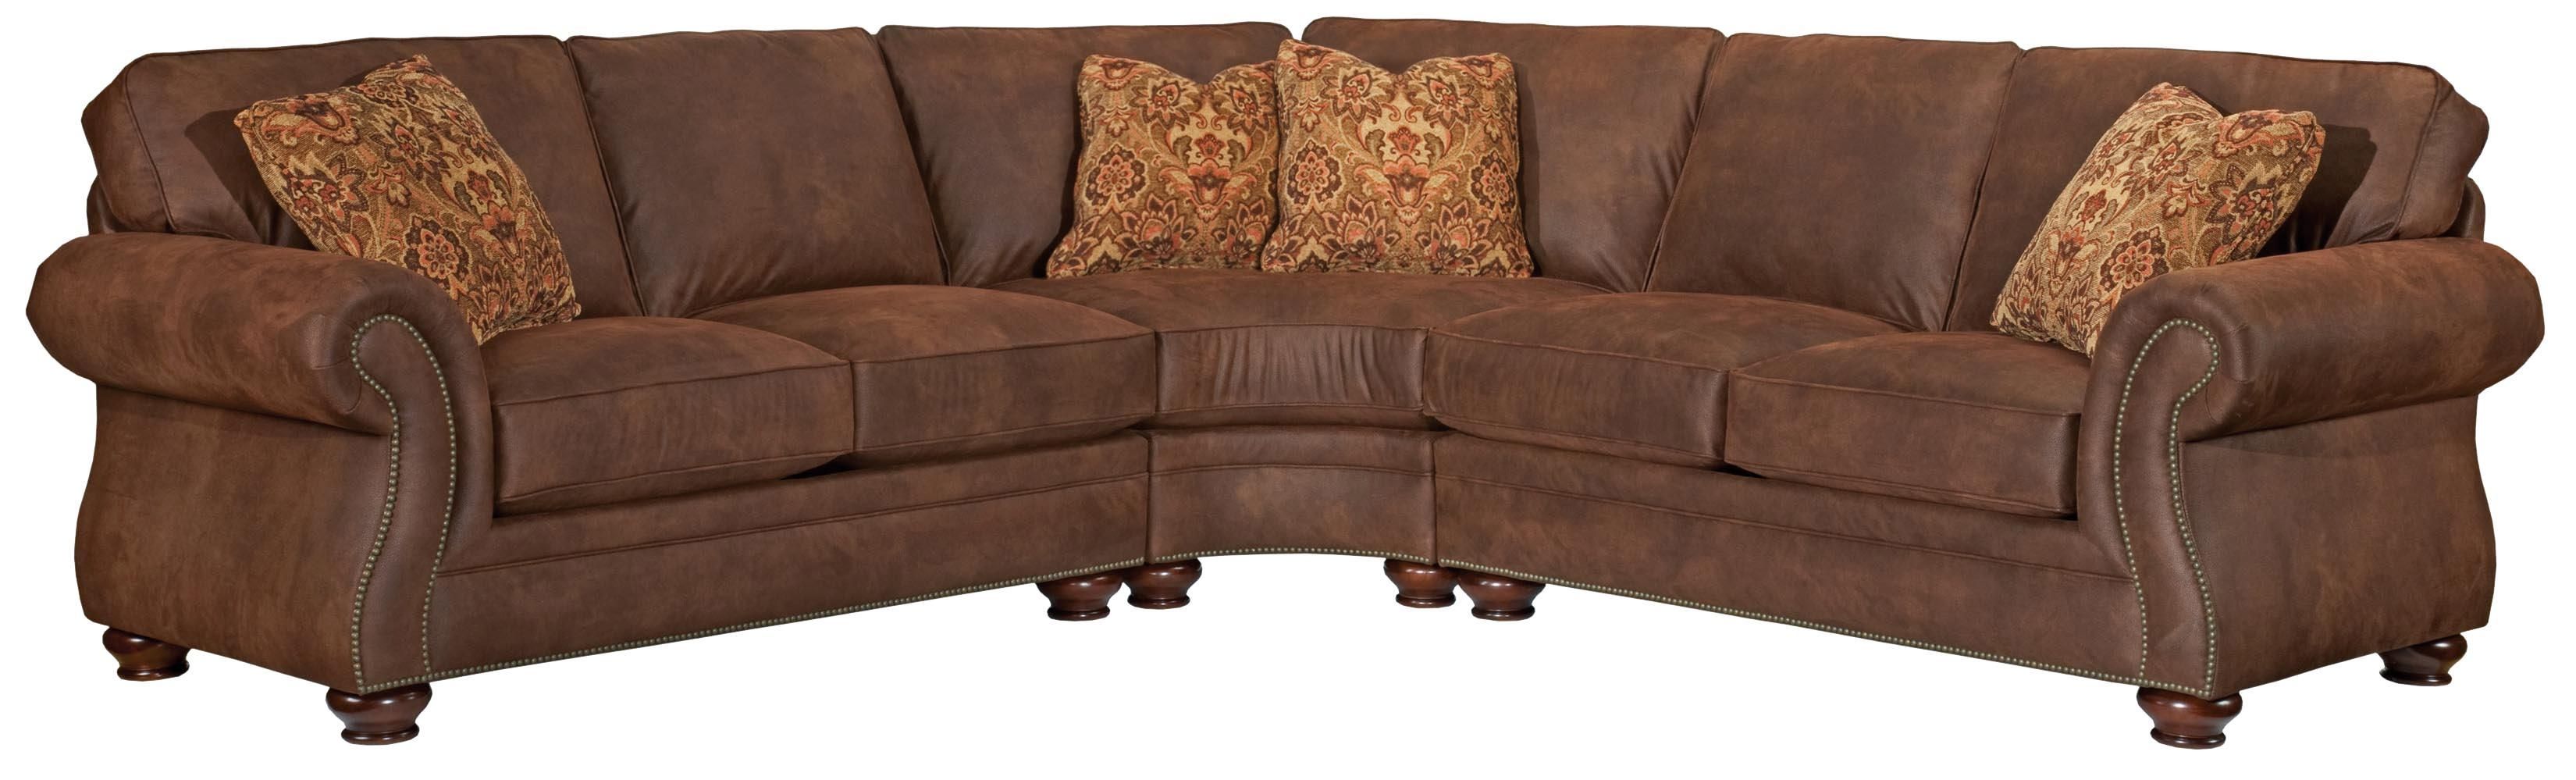 Featured Photo of Broyhill Sectional Sofa